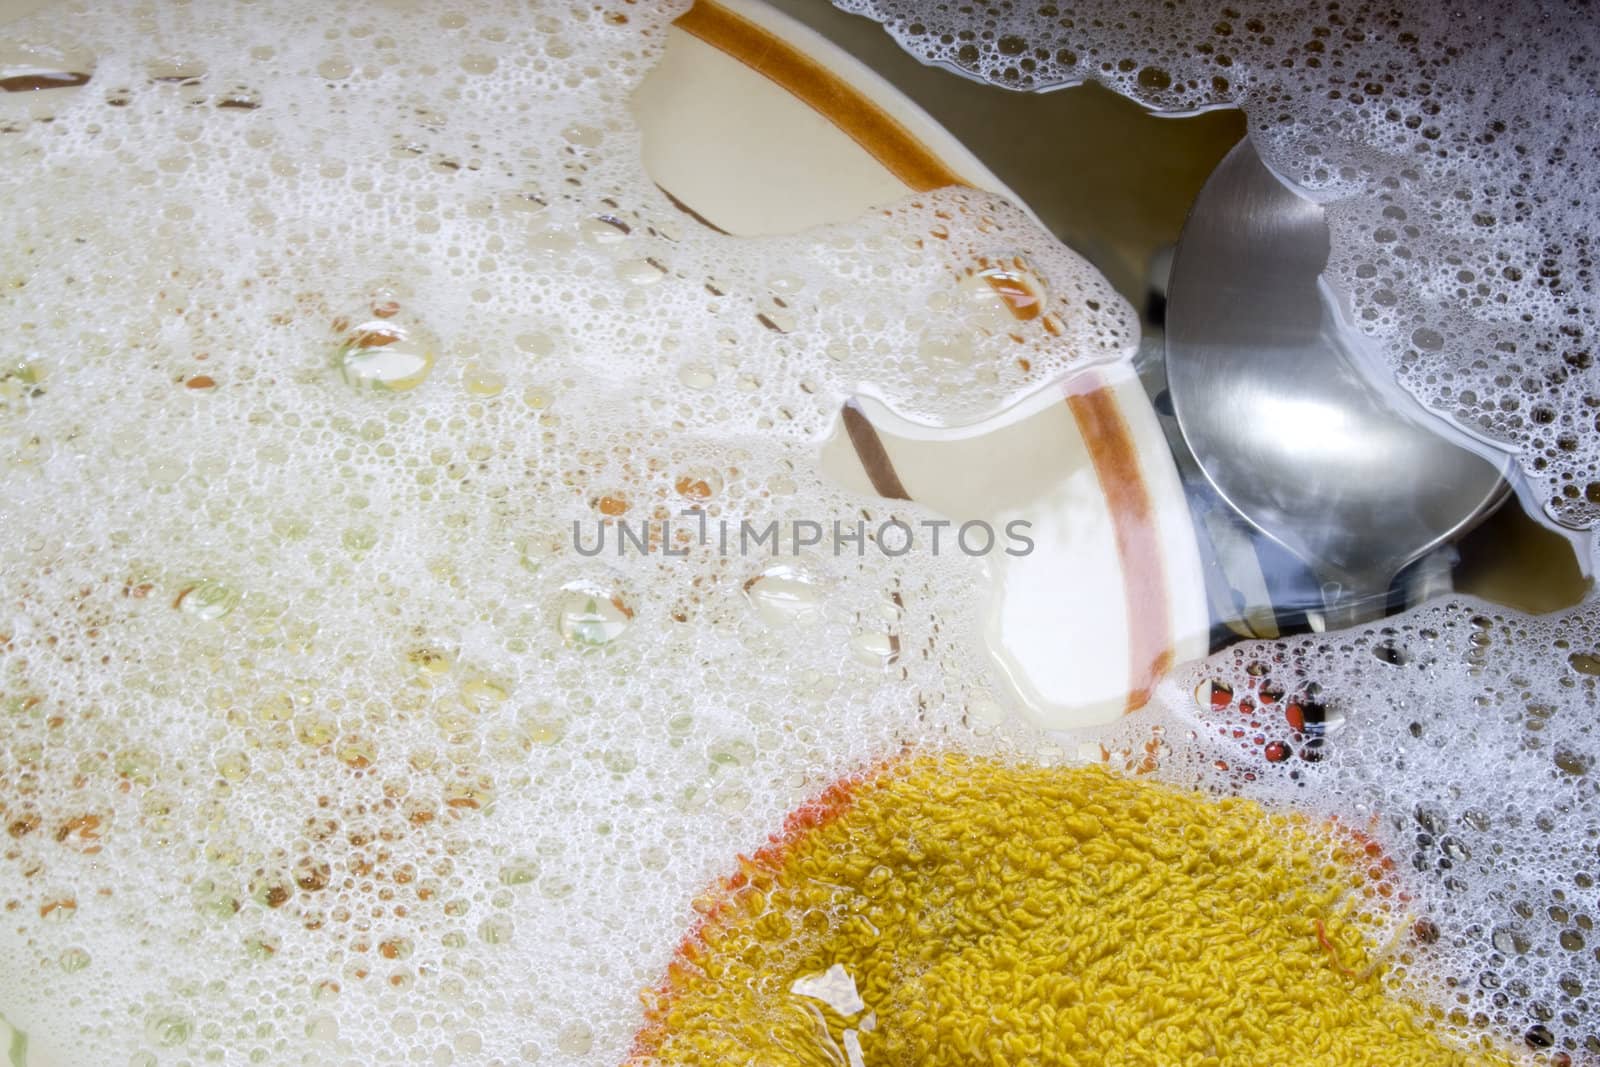 Dishes with dishrag and soapy water in sink